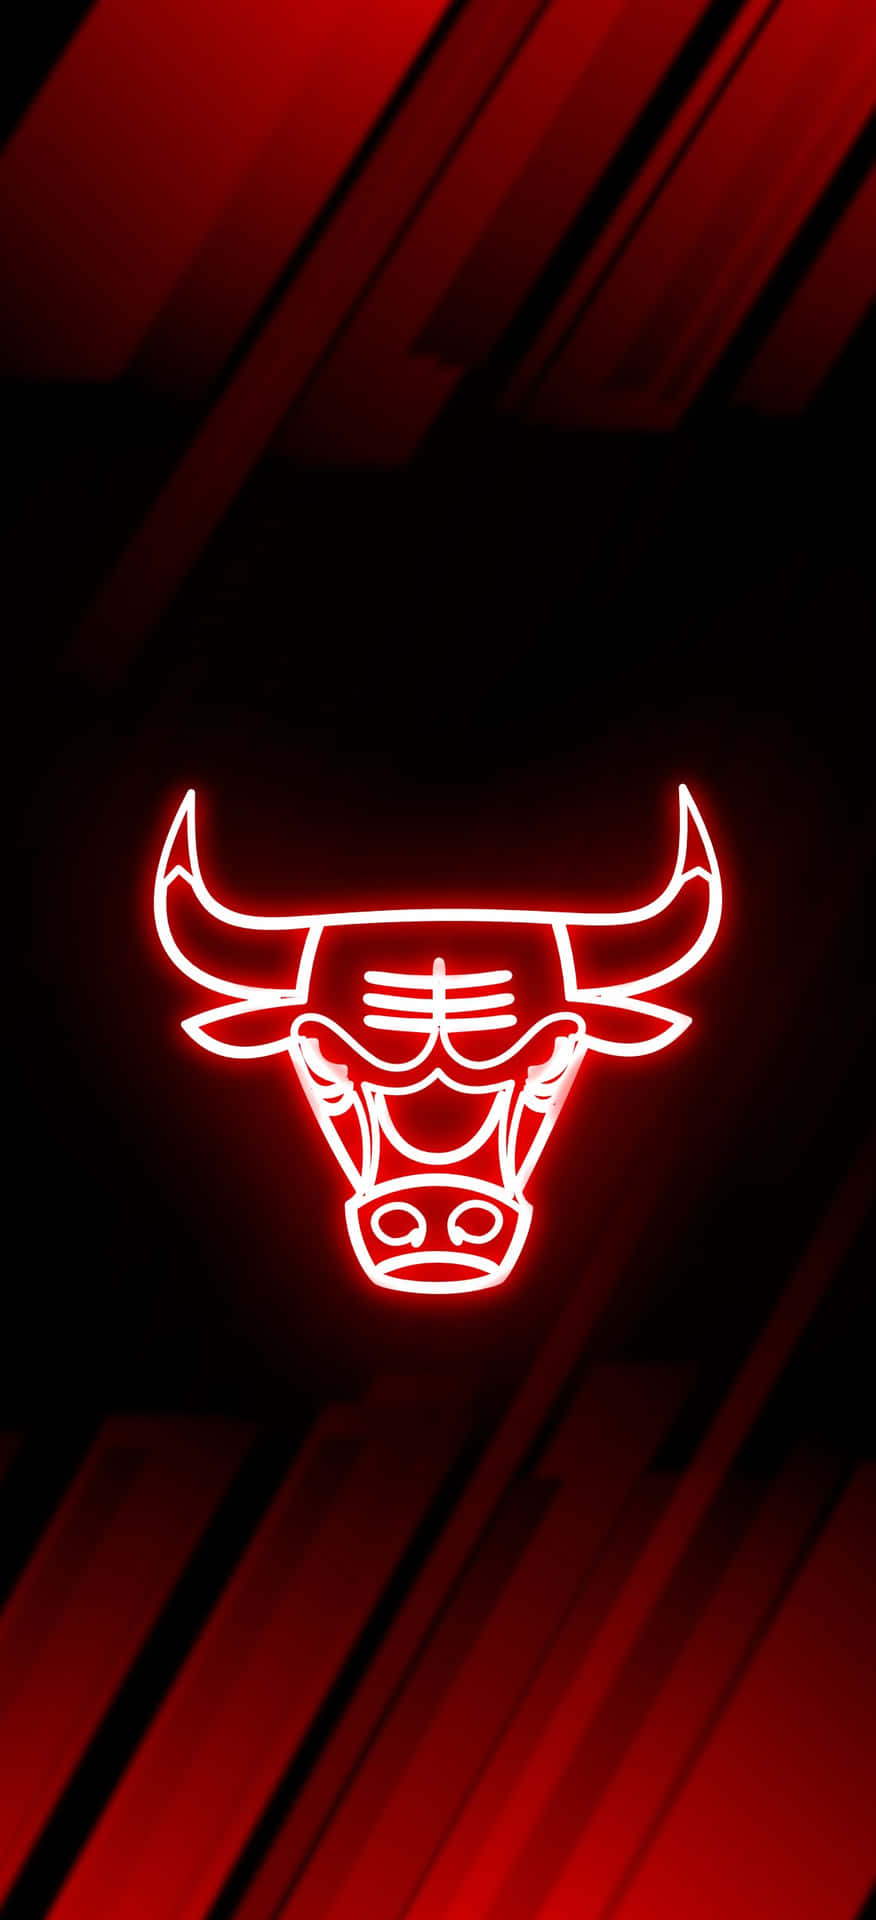 Chicago Bulls Logo On A Red Background Wallpaper